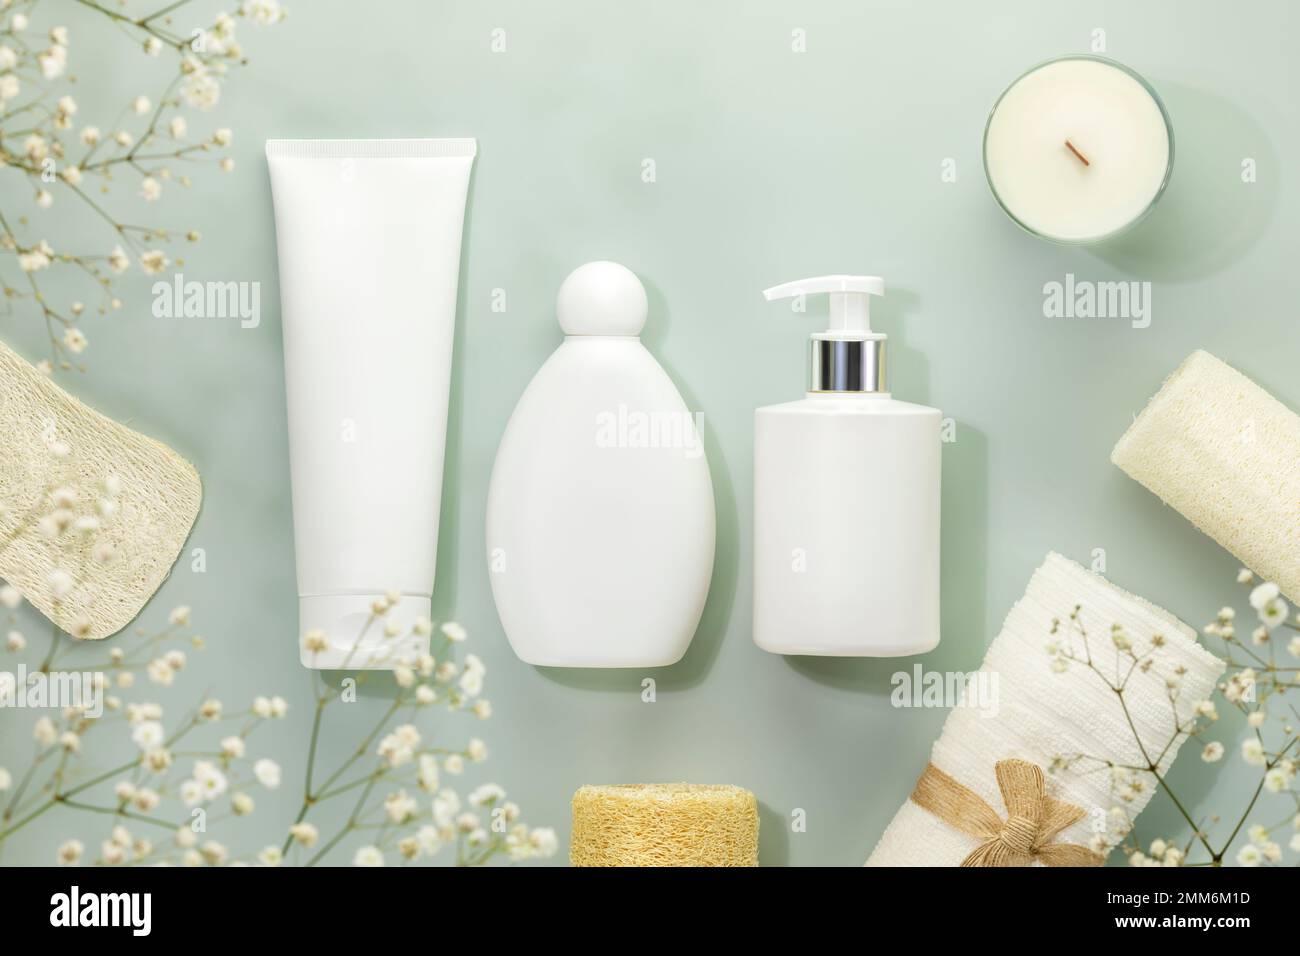 Eco friendly spa relax composition with mockup of beauty products, candle and spa accessories on blue background with white flowers. Wellness and skin Stock Photo